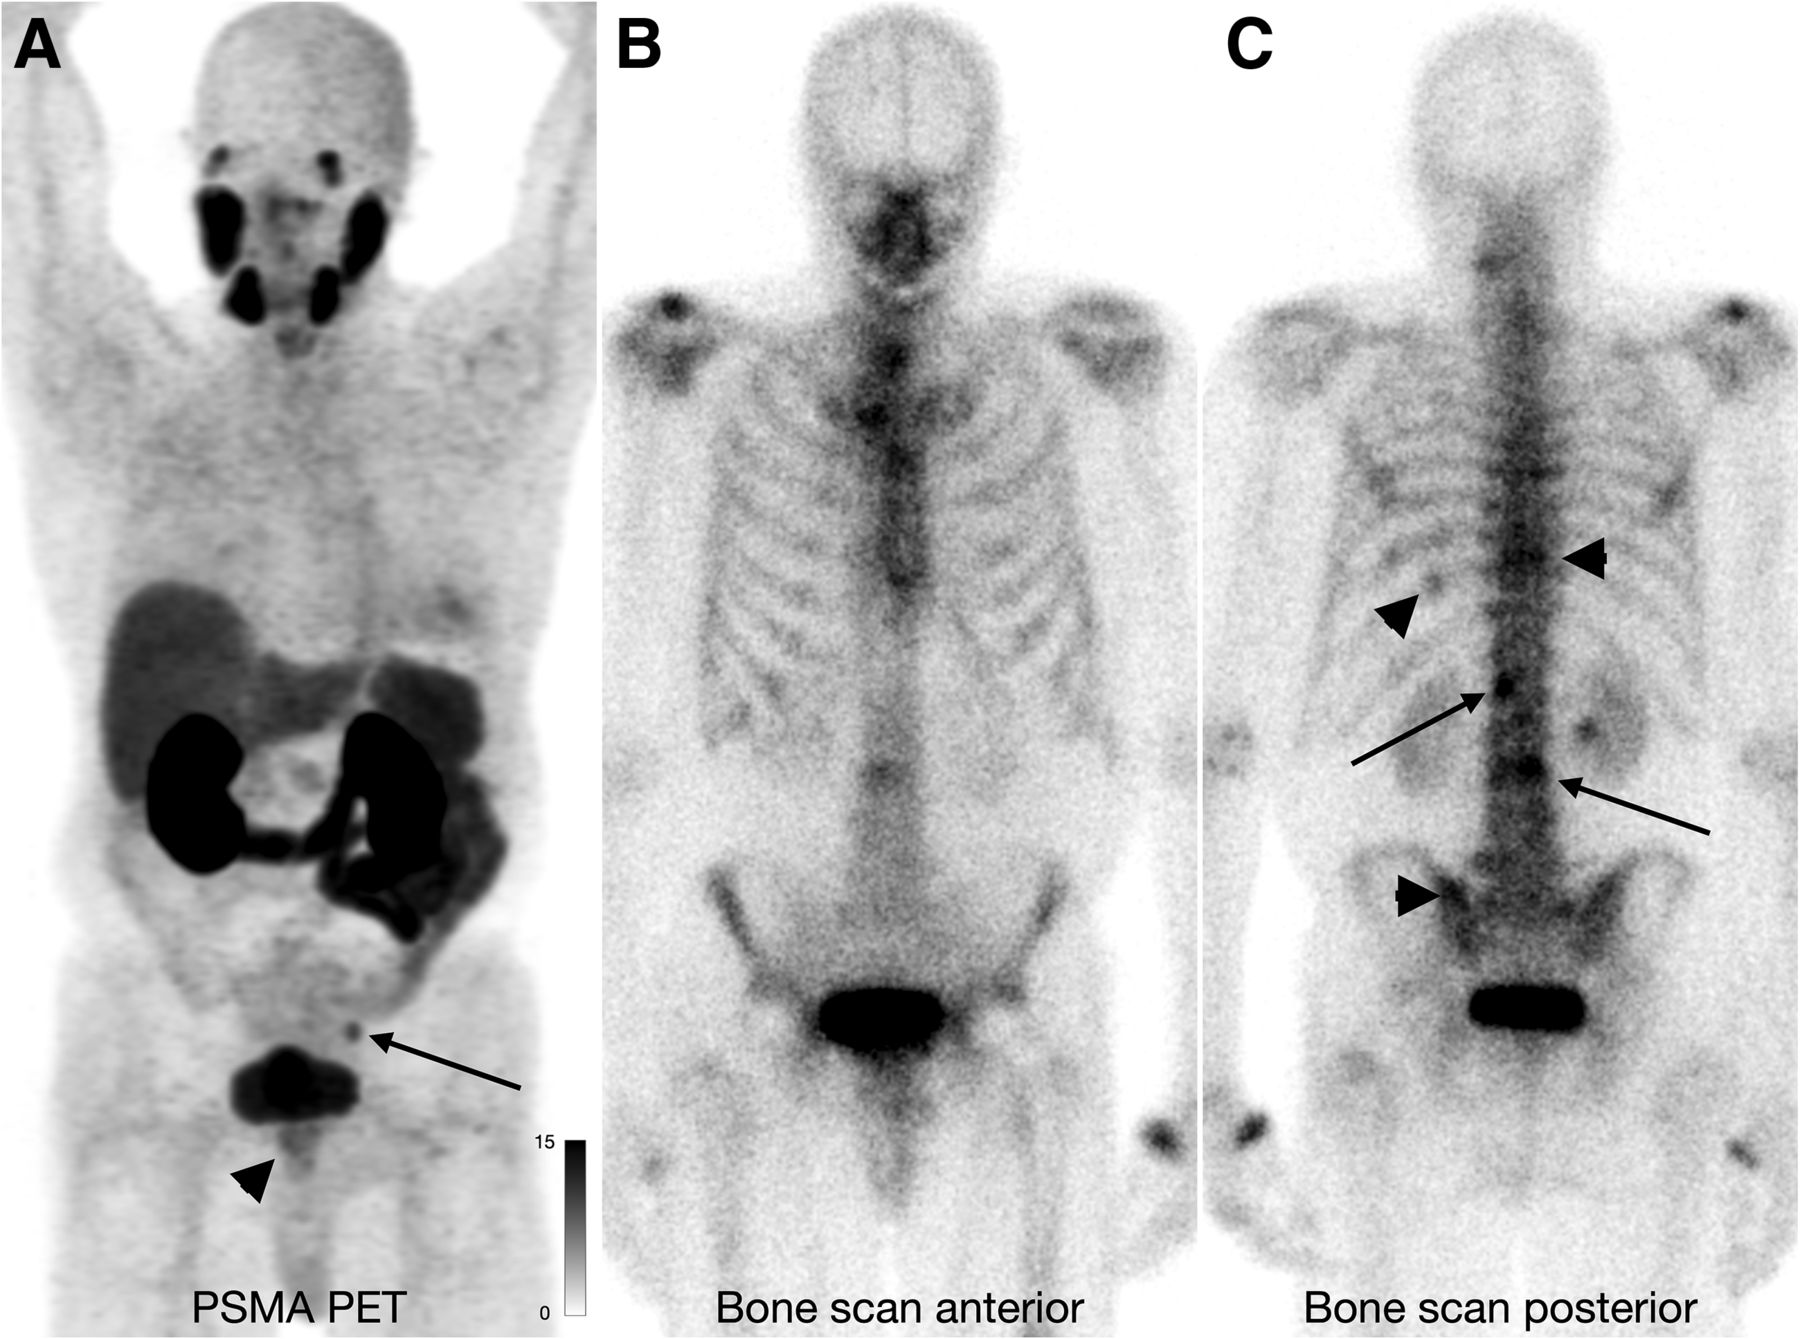 Images courtesy of the Journal of Nuclear Imaging.